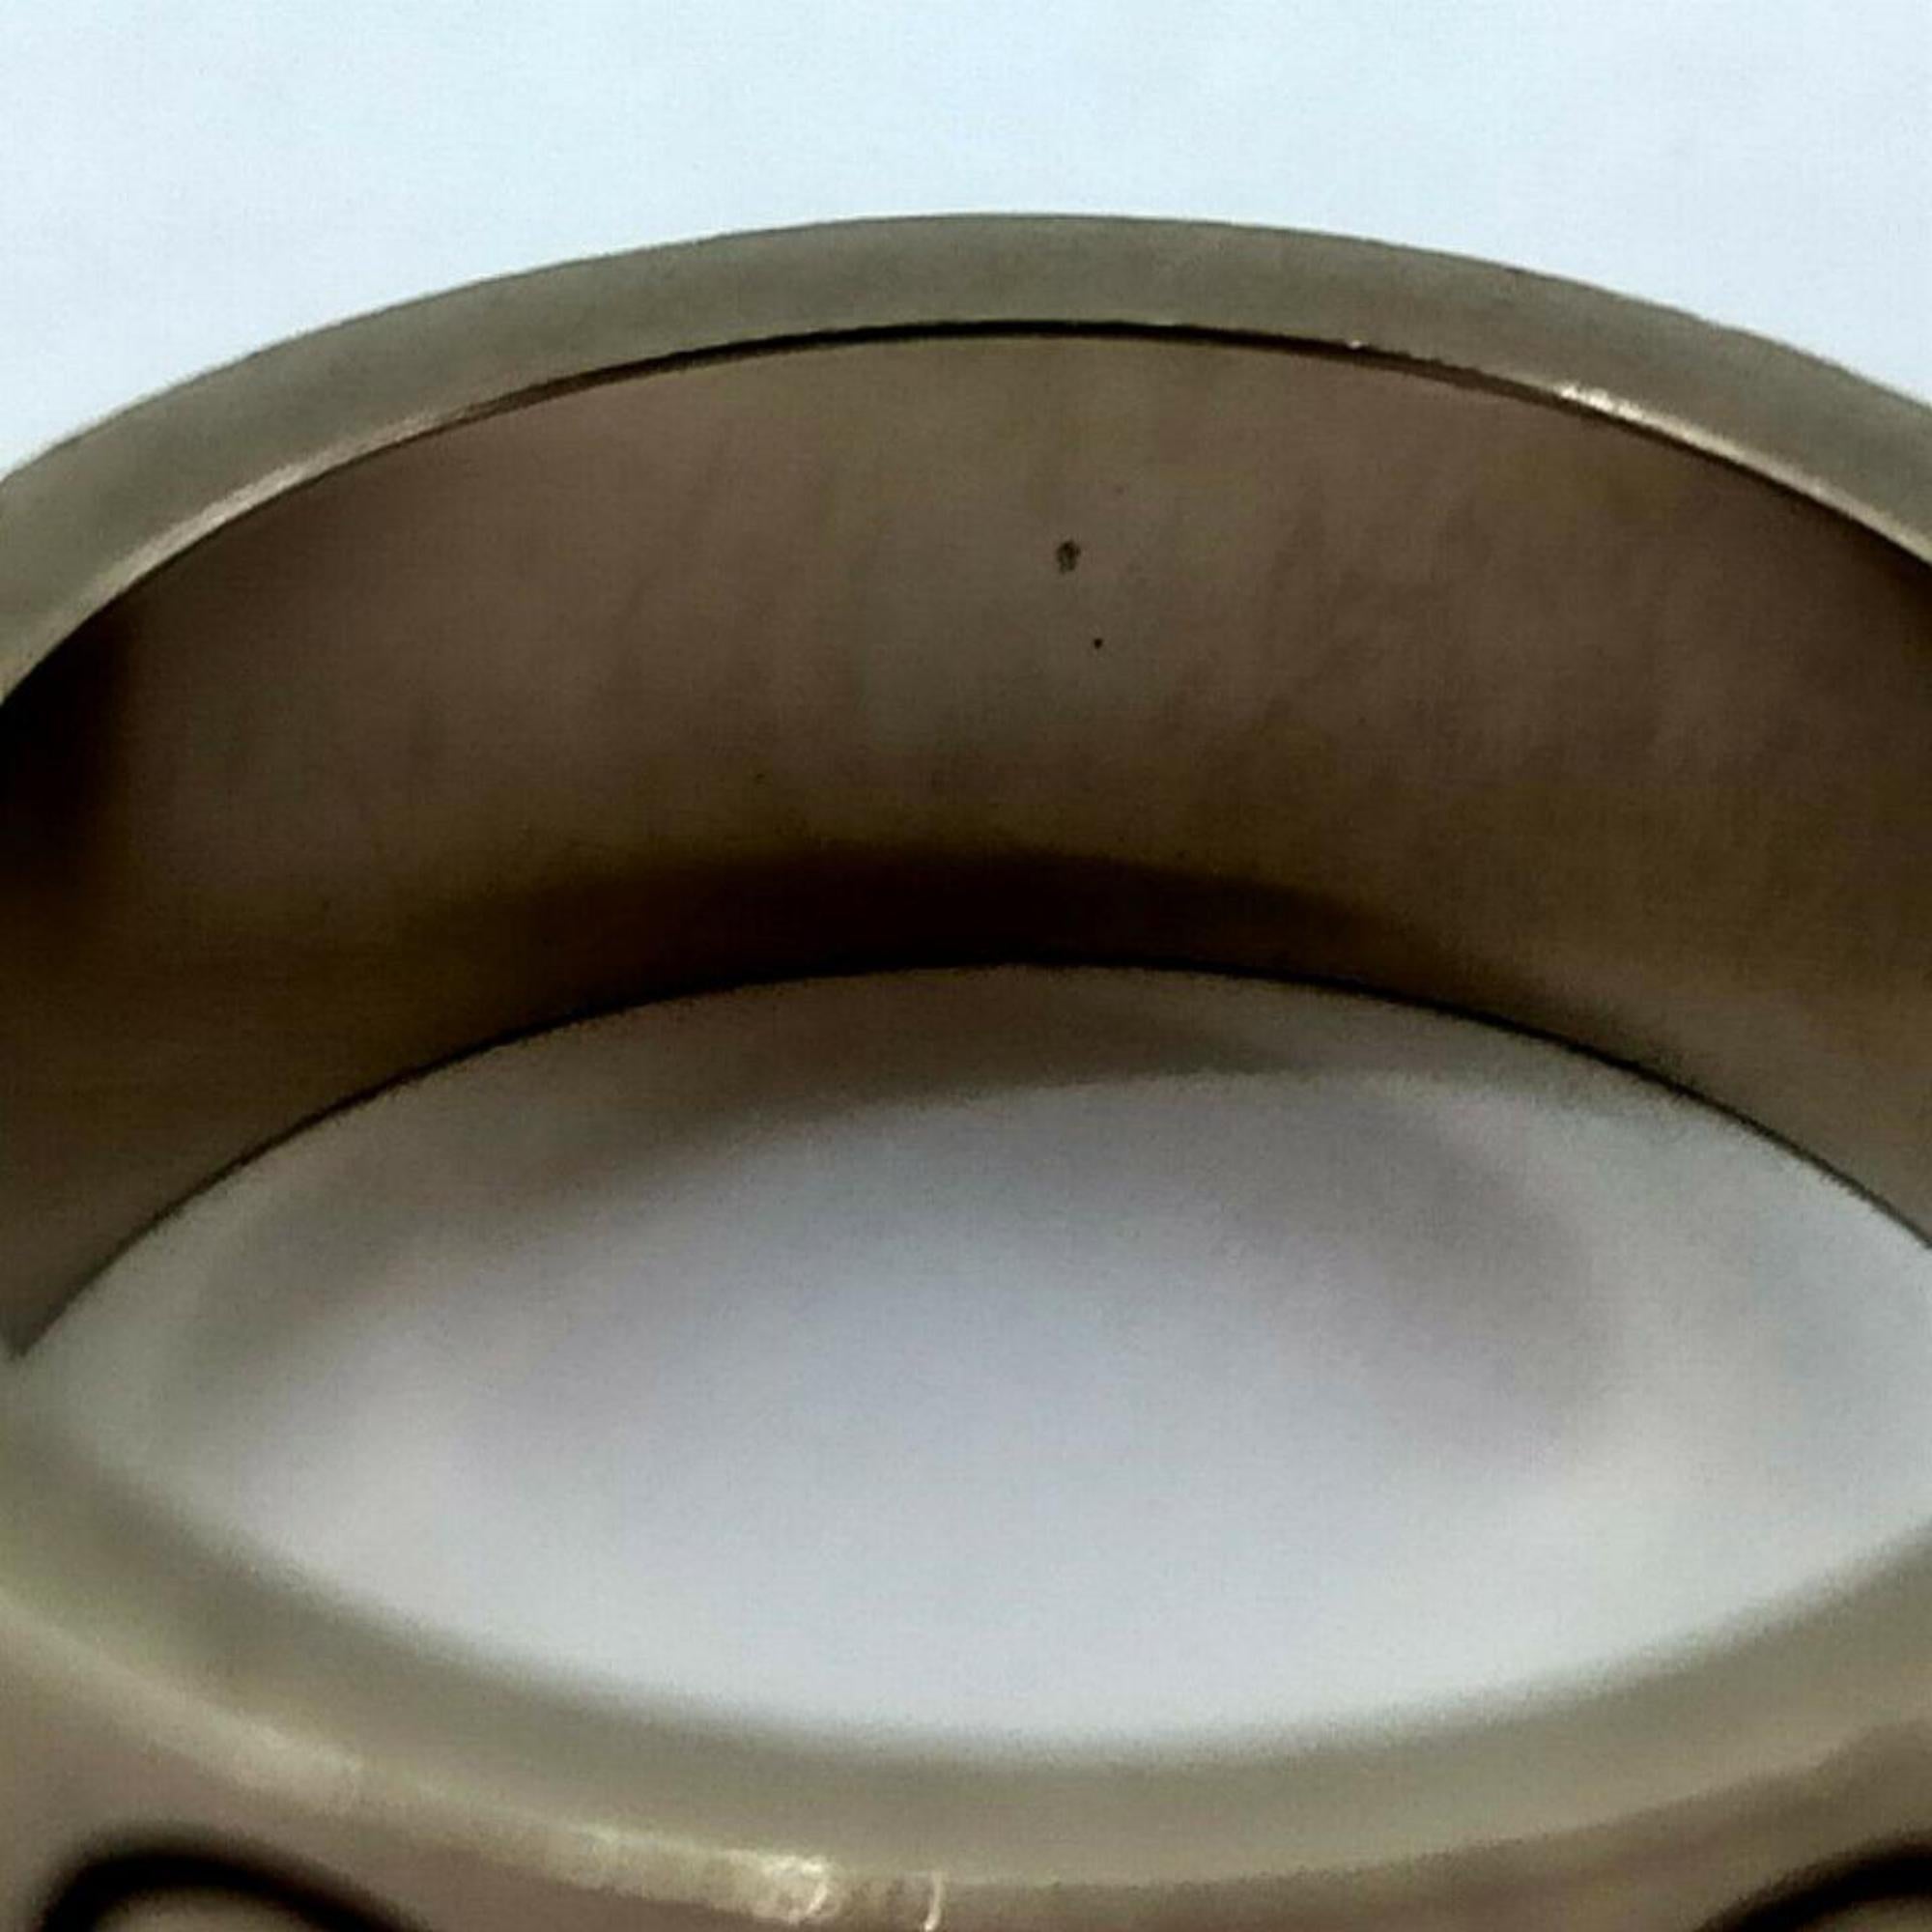 GOOD+  CONDITION
(7.25/10 or B+)
Ring Size : JPN 8, US 4 1/2
Material : White Gold
Purity : 18k
Gross Weight : 6.96 g / 0.245 oz
Minor scuffed mark on the surfac
Main Color : White gold

Serial No : K25726


SKU : 863540